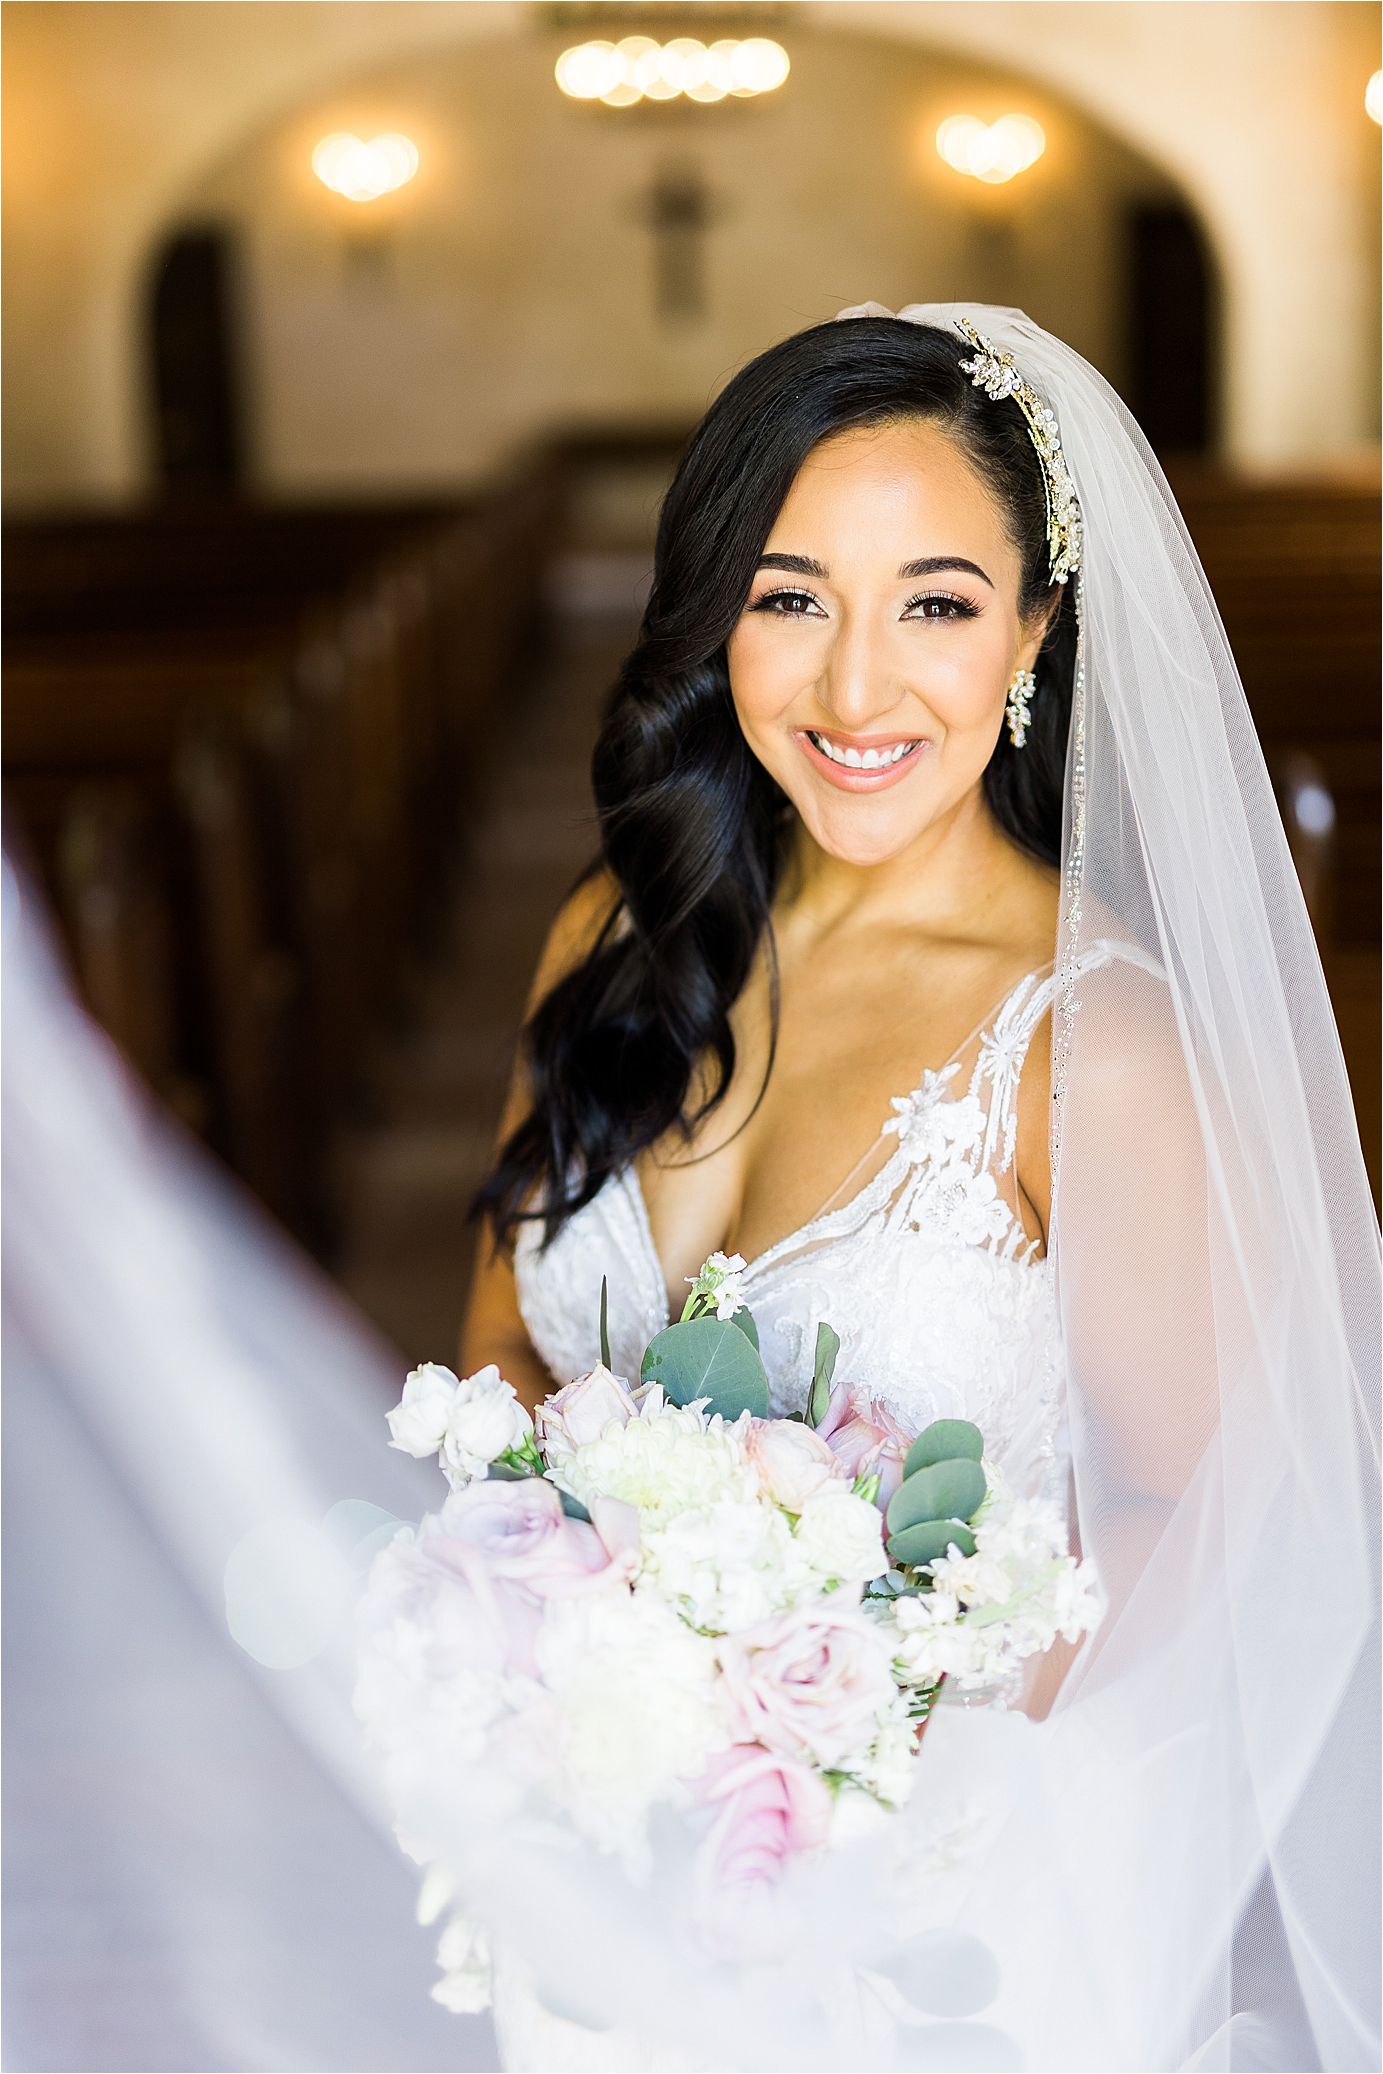 A bride smiles with inside a mission chapel as her veil swoops in front of her holding a bouquet of pink and white flowers during her bridal session at Lost Mission in Bulverde, Texas